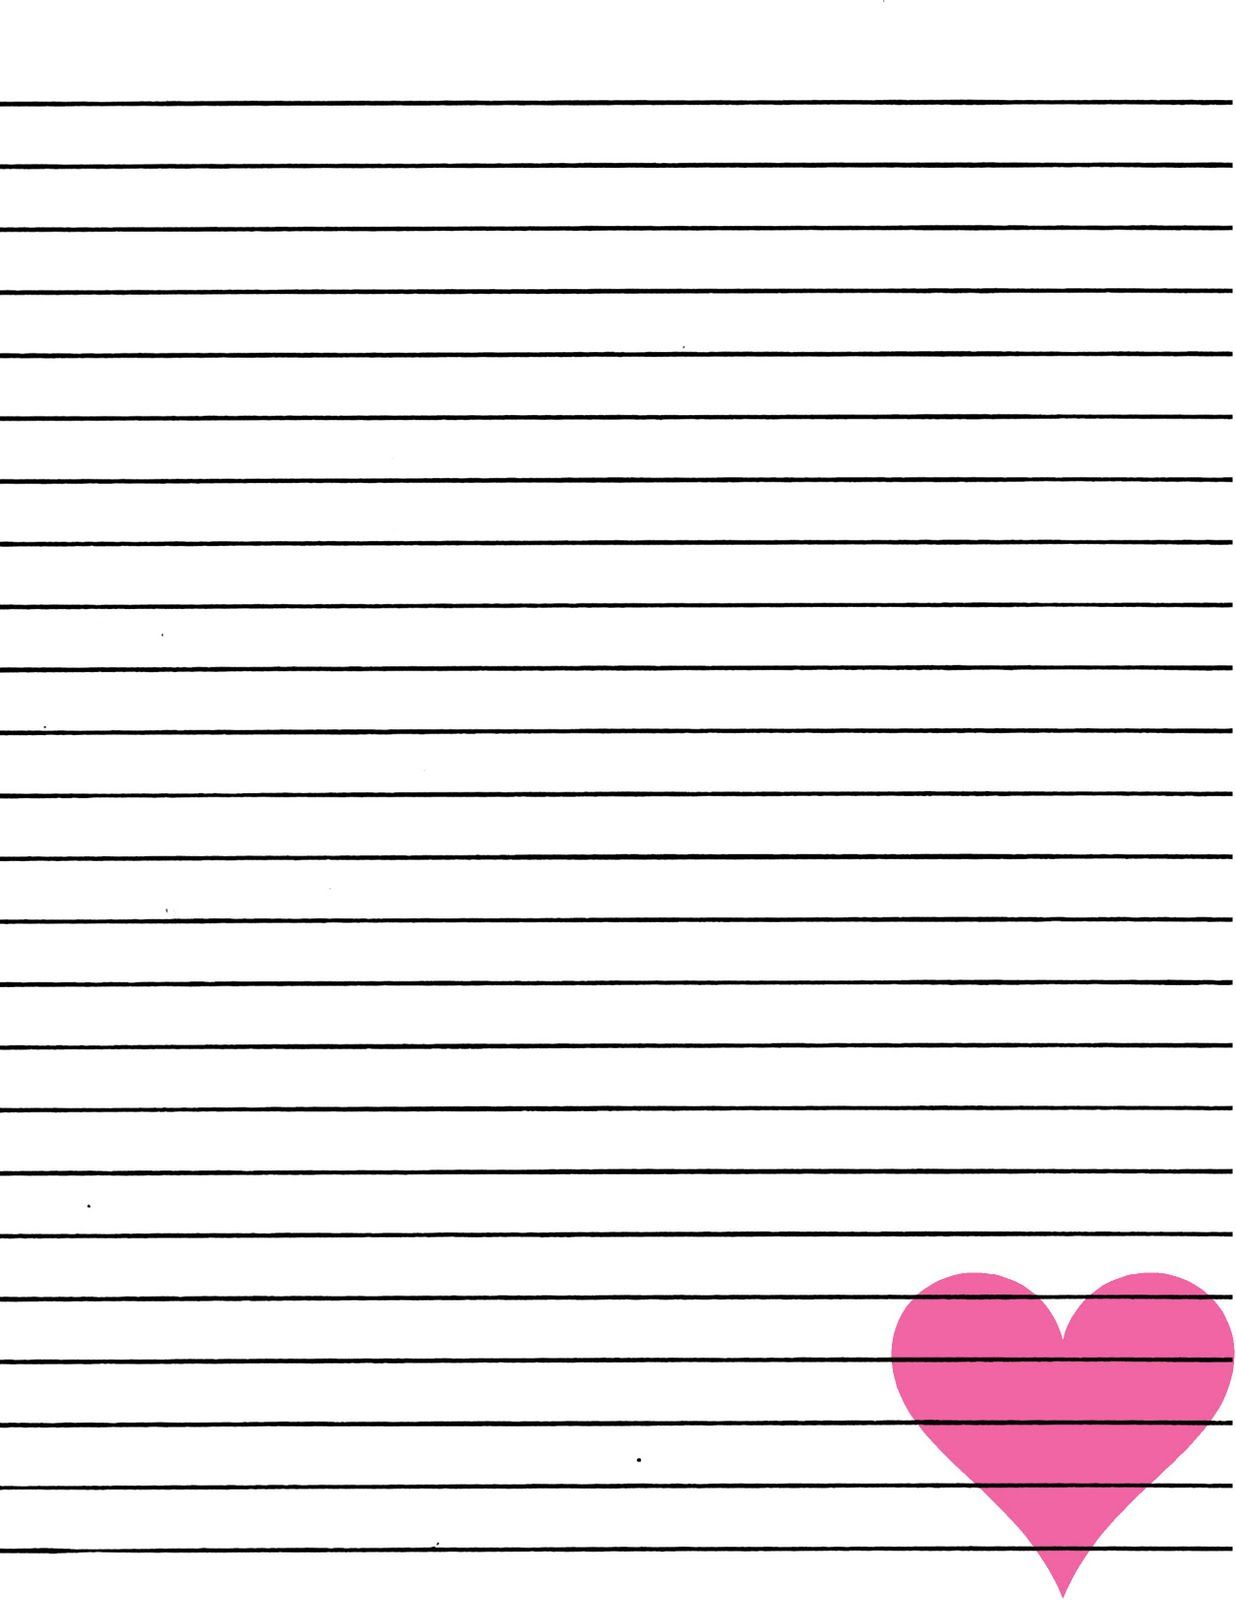 Just Smashing Paper: Freebie!! Pink Heart Lined Paper Printable - Free Printable Lined Paper